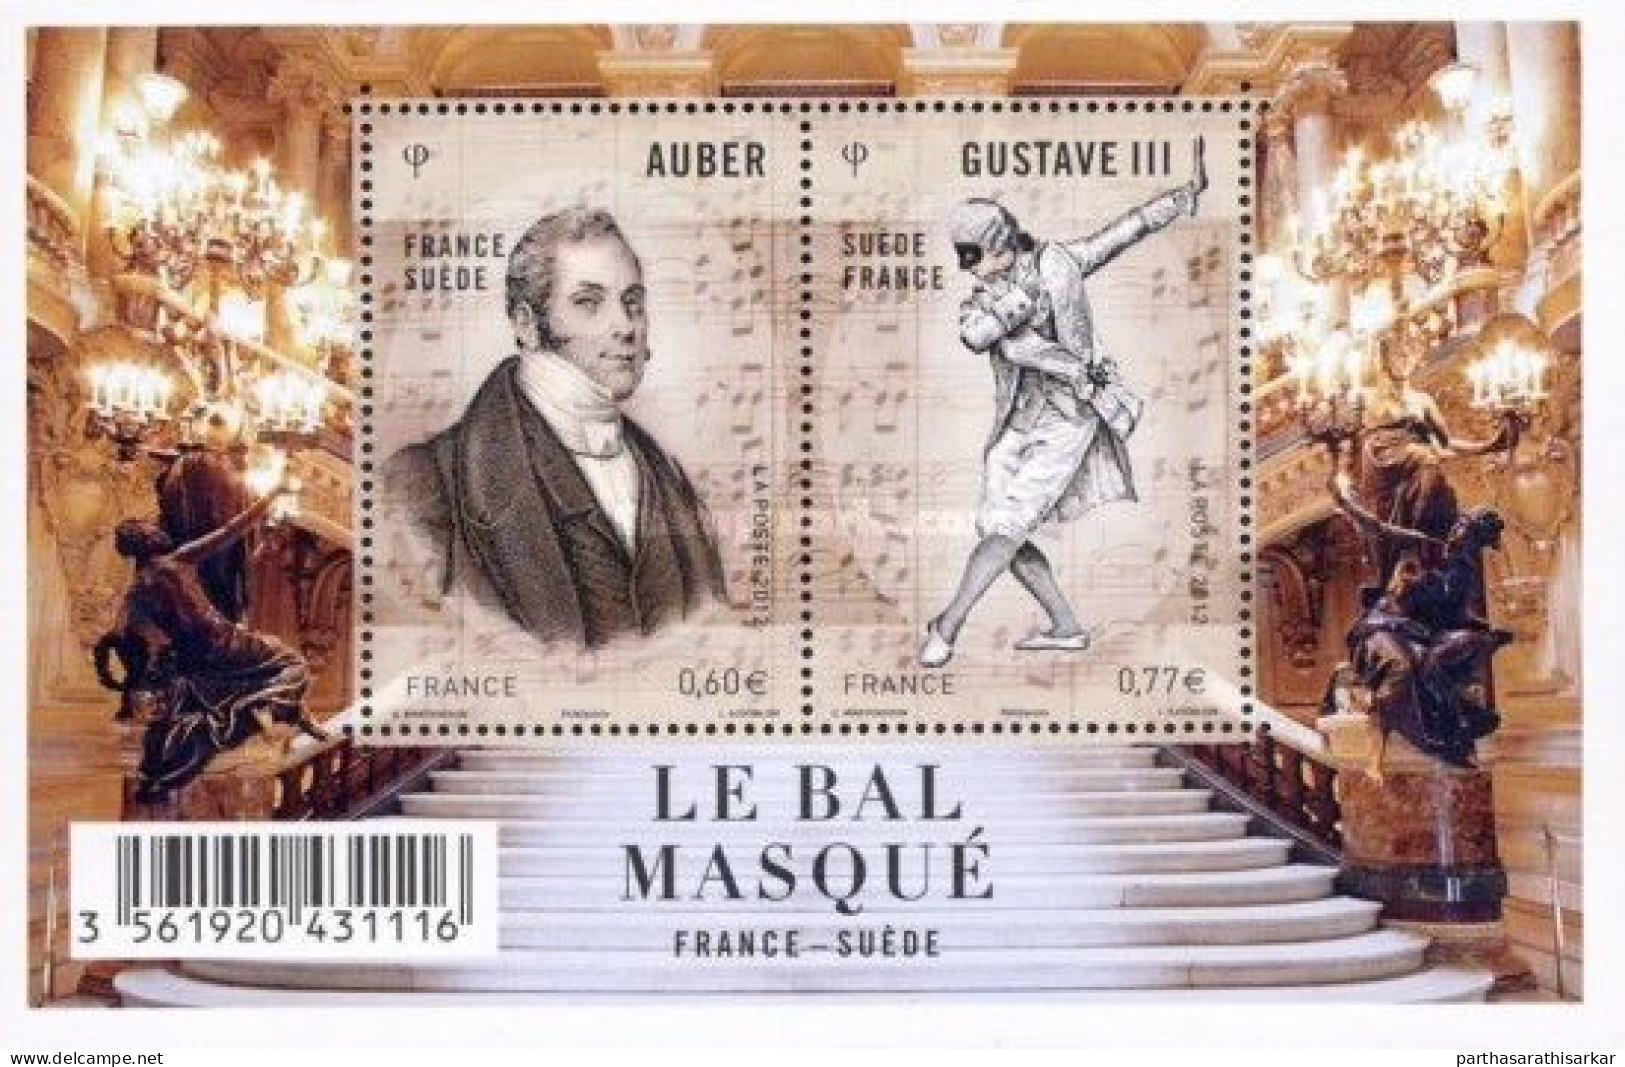 FRANCE 2012 MUSICIAN JOINT ISSUE WITH SWEDEN MINIATURE SHEET MS MNH - Emisiones Comunes